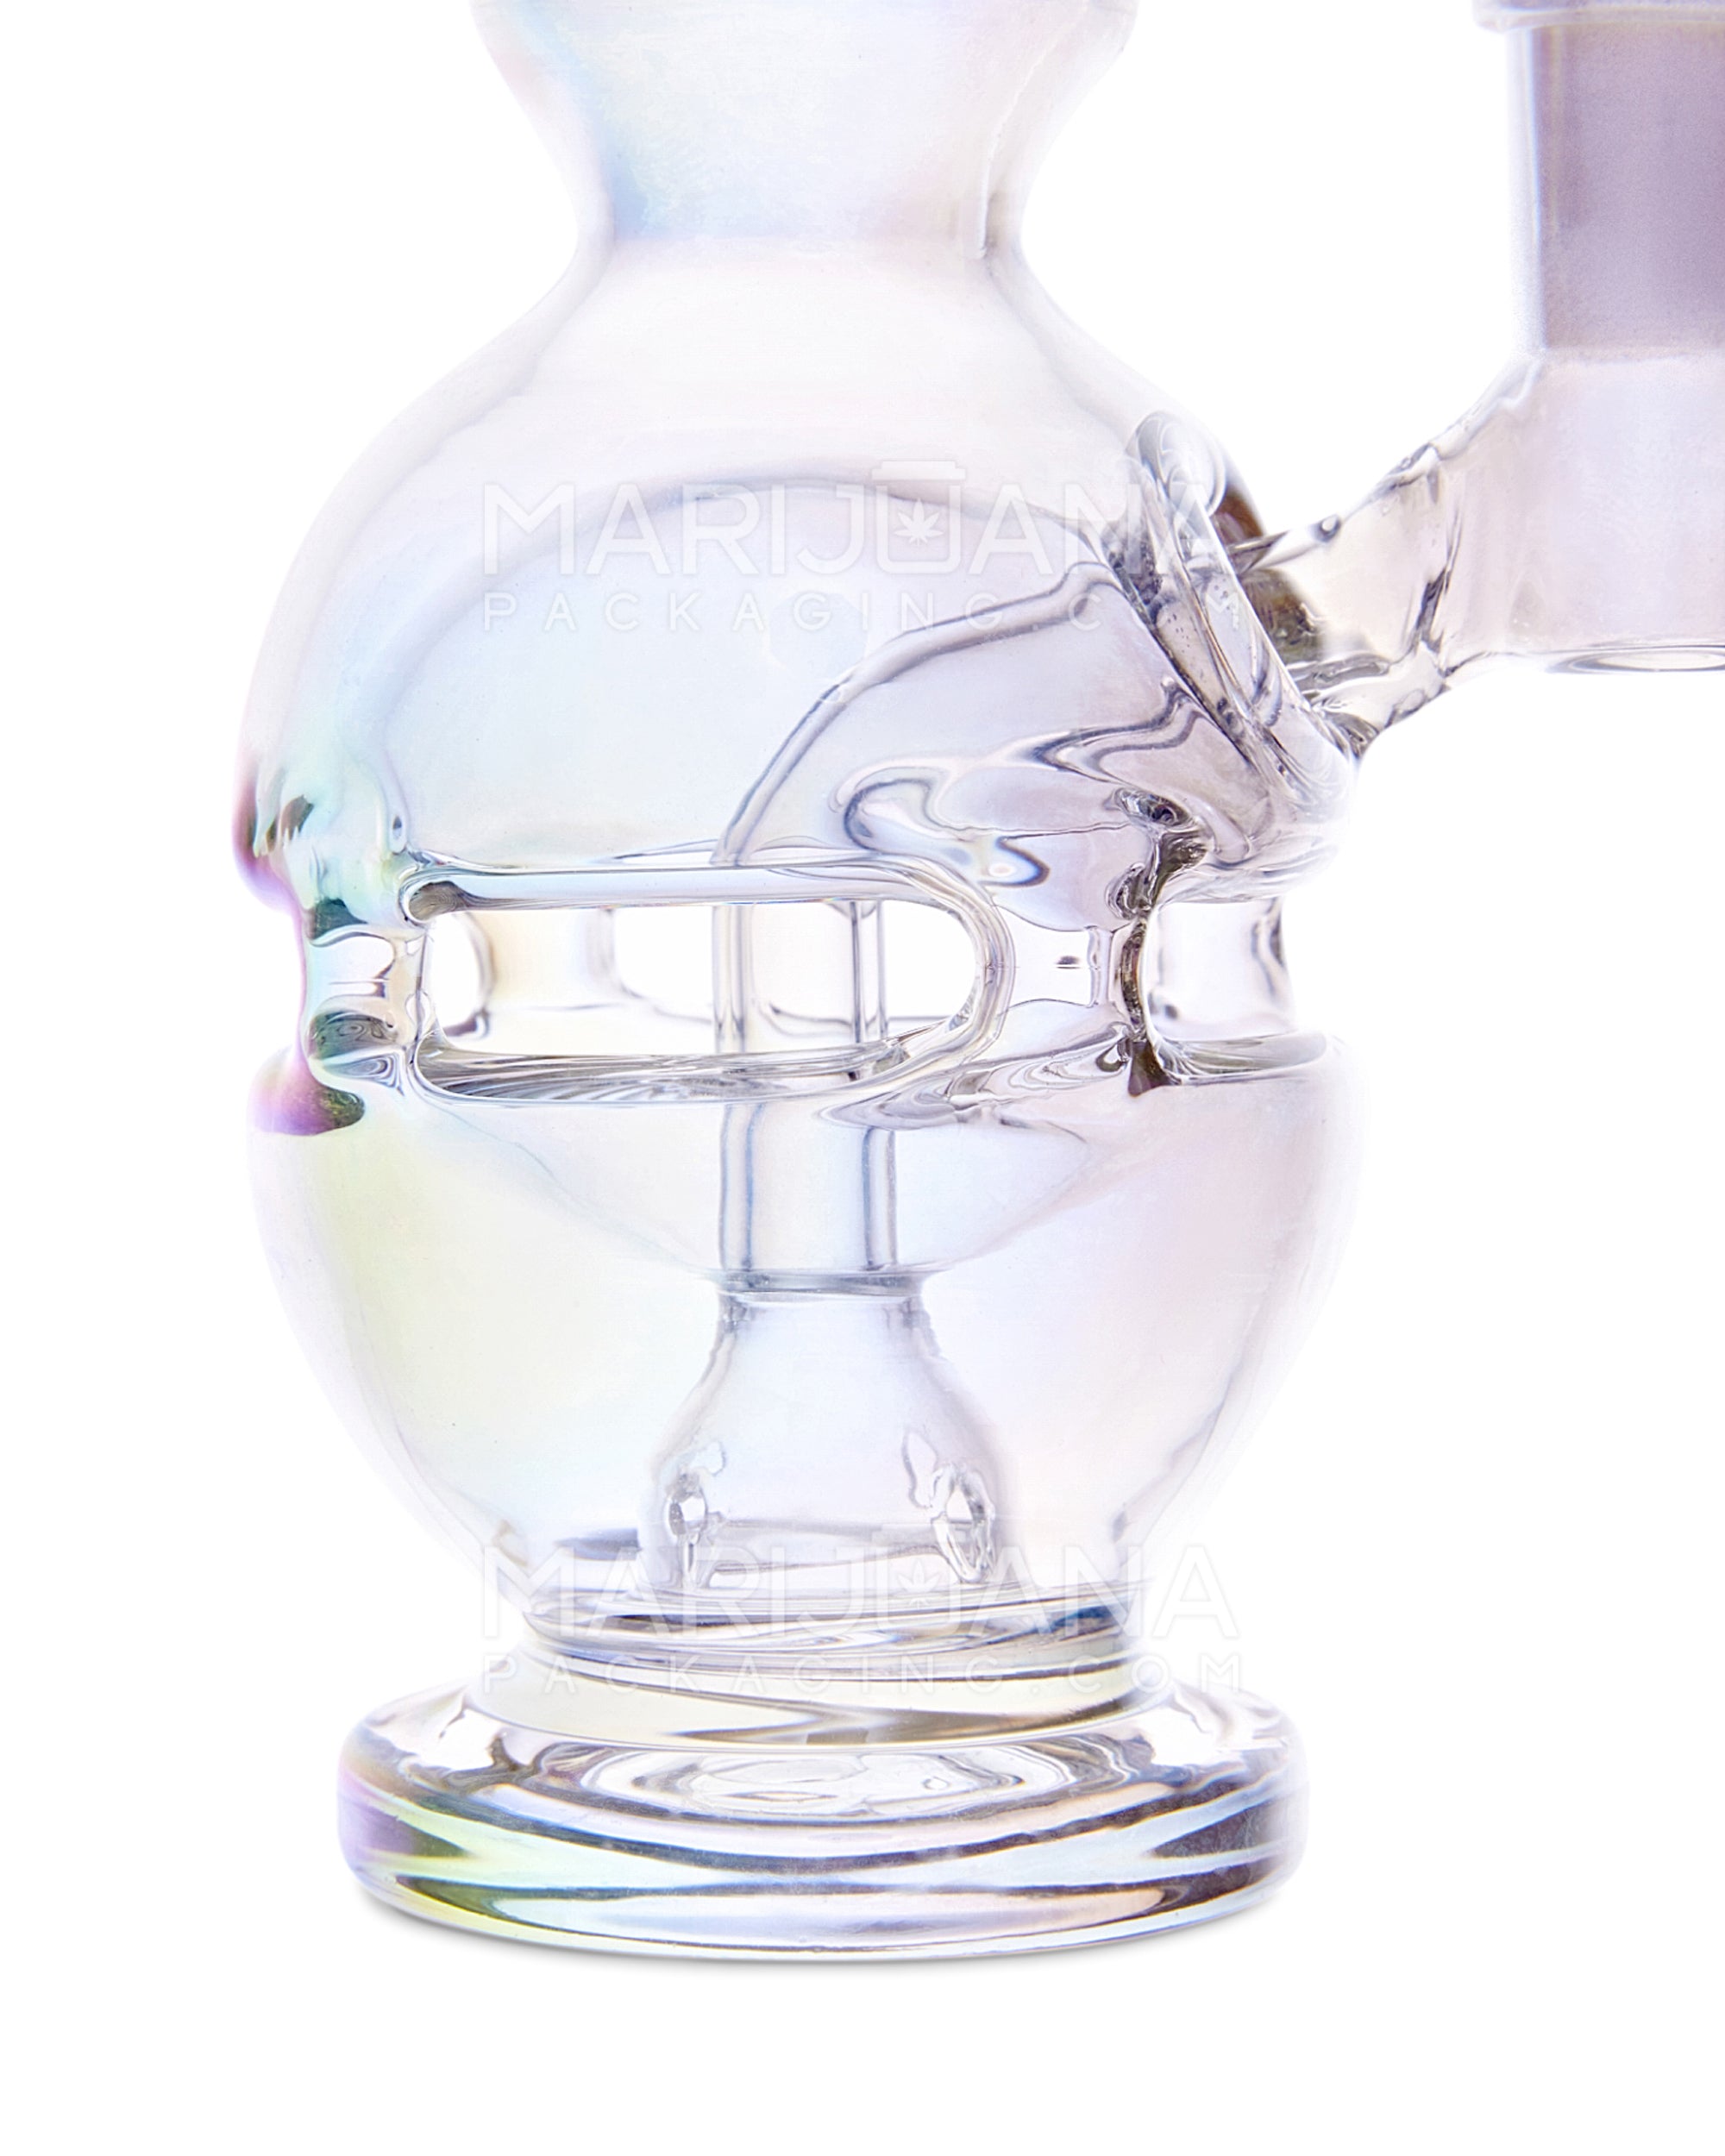 Bent Neck Glass Faberge Egg Dab Rig w/ Thick Base | 5in Tall - 10mm Banger - Iridescent